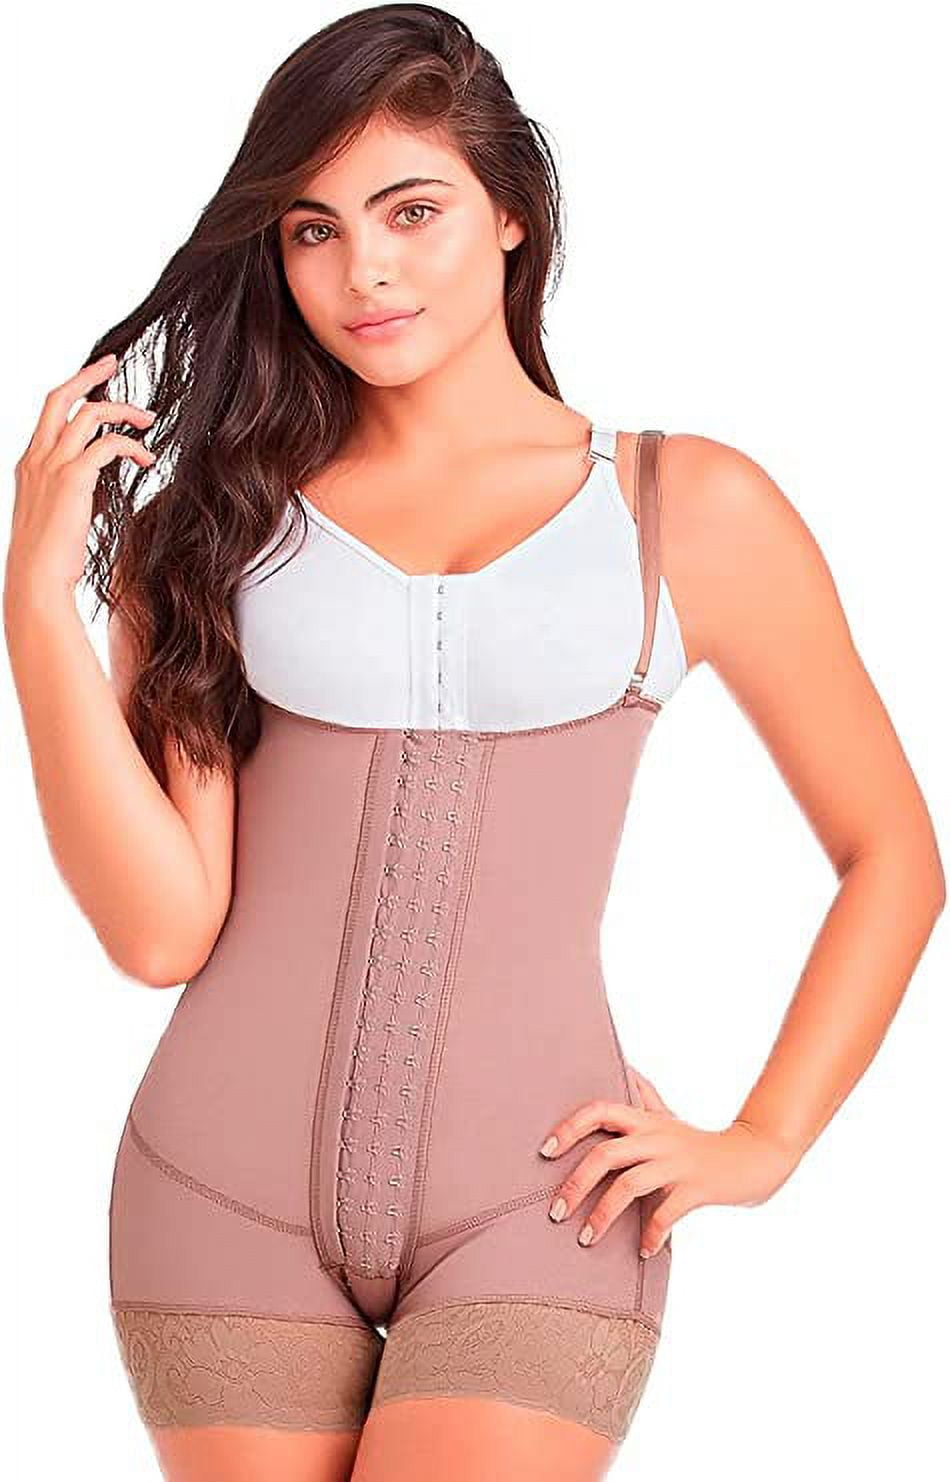 Bridal Edition: Colombian Shapewear for your wedding day – Shapes Secrets  Fajas